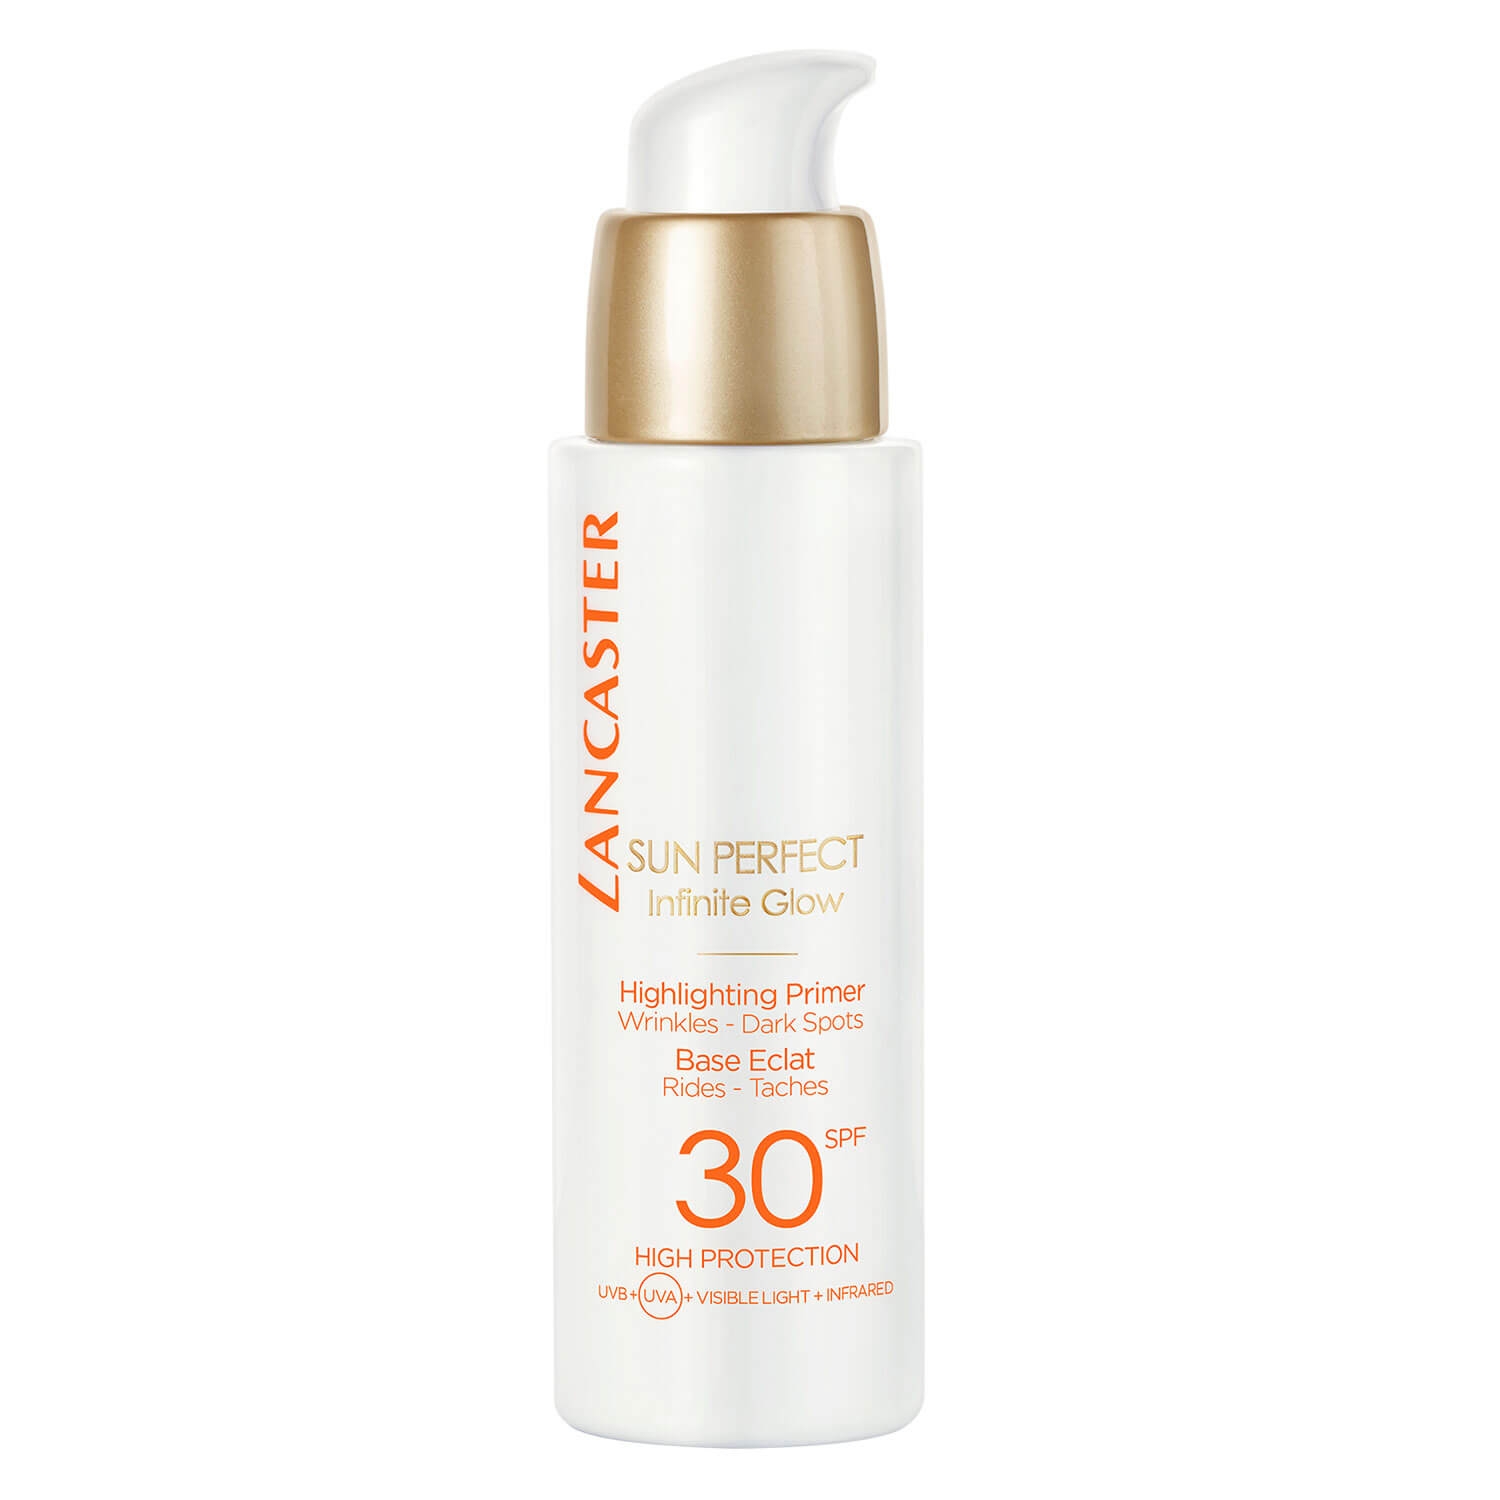 Product image from Sun Perfect - Highlighting Primer SPF30